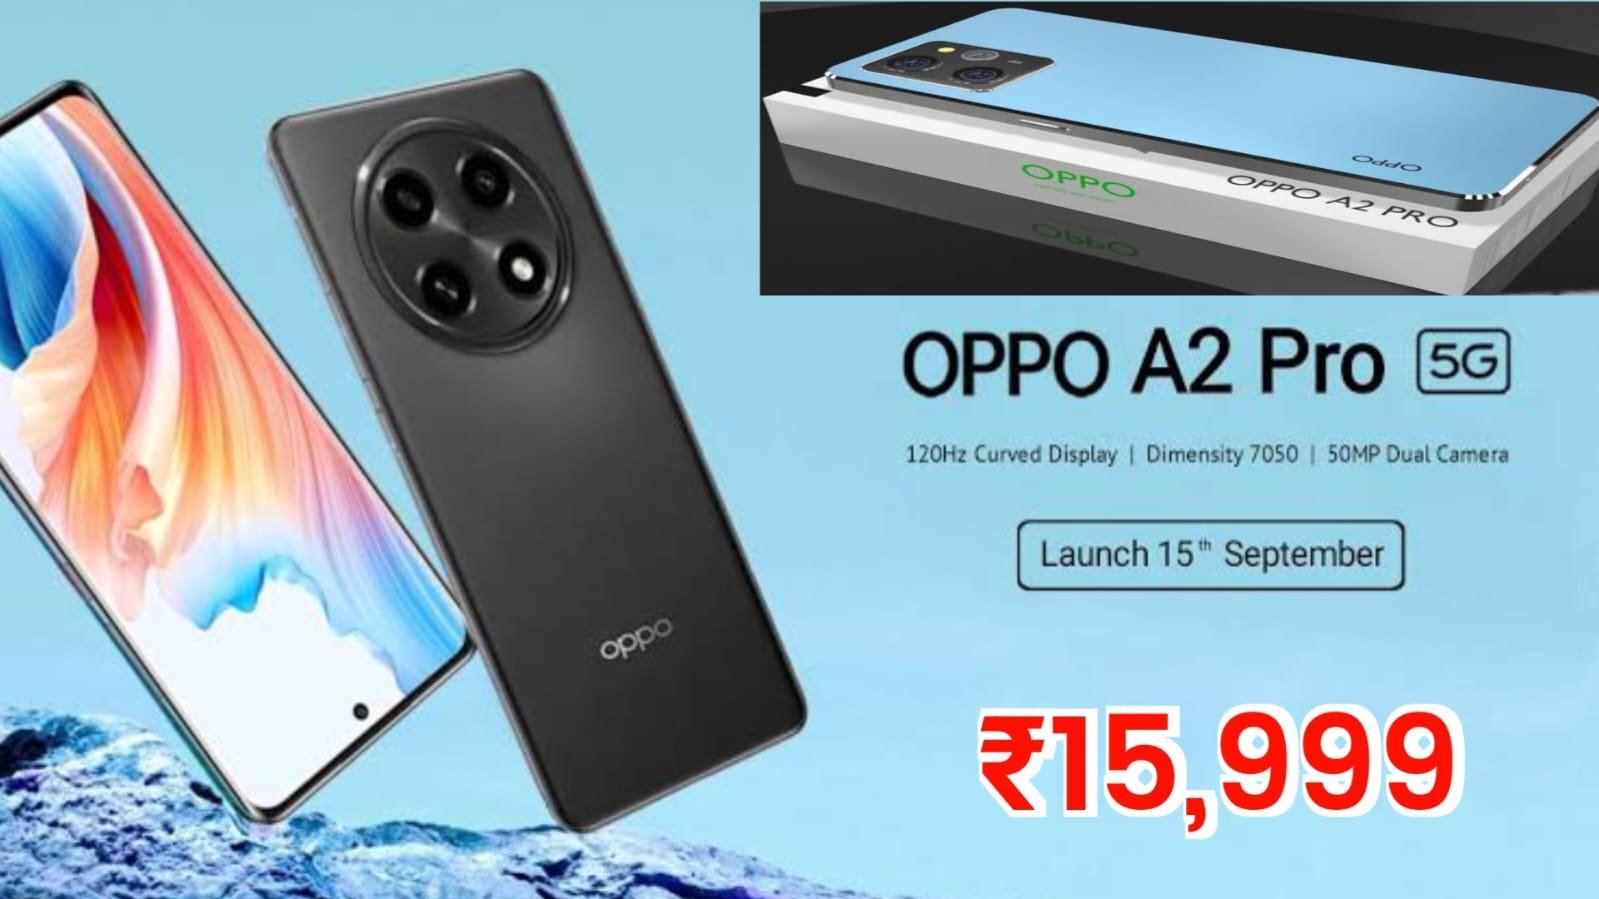 OPPO A2 Pro 5G Price in India